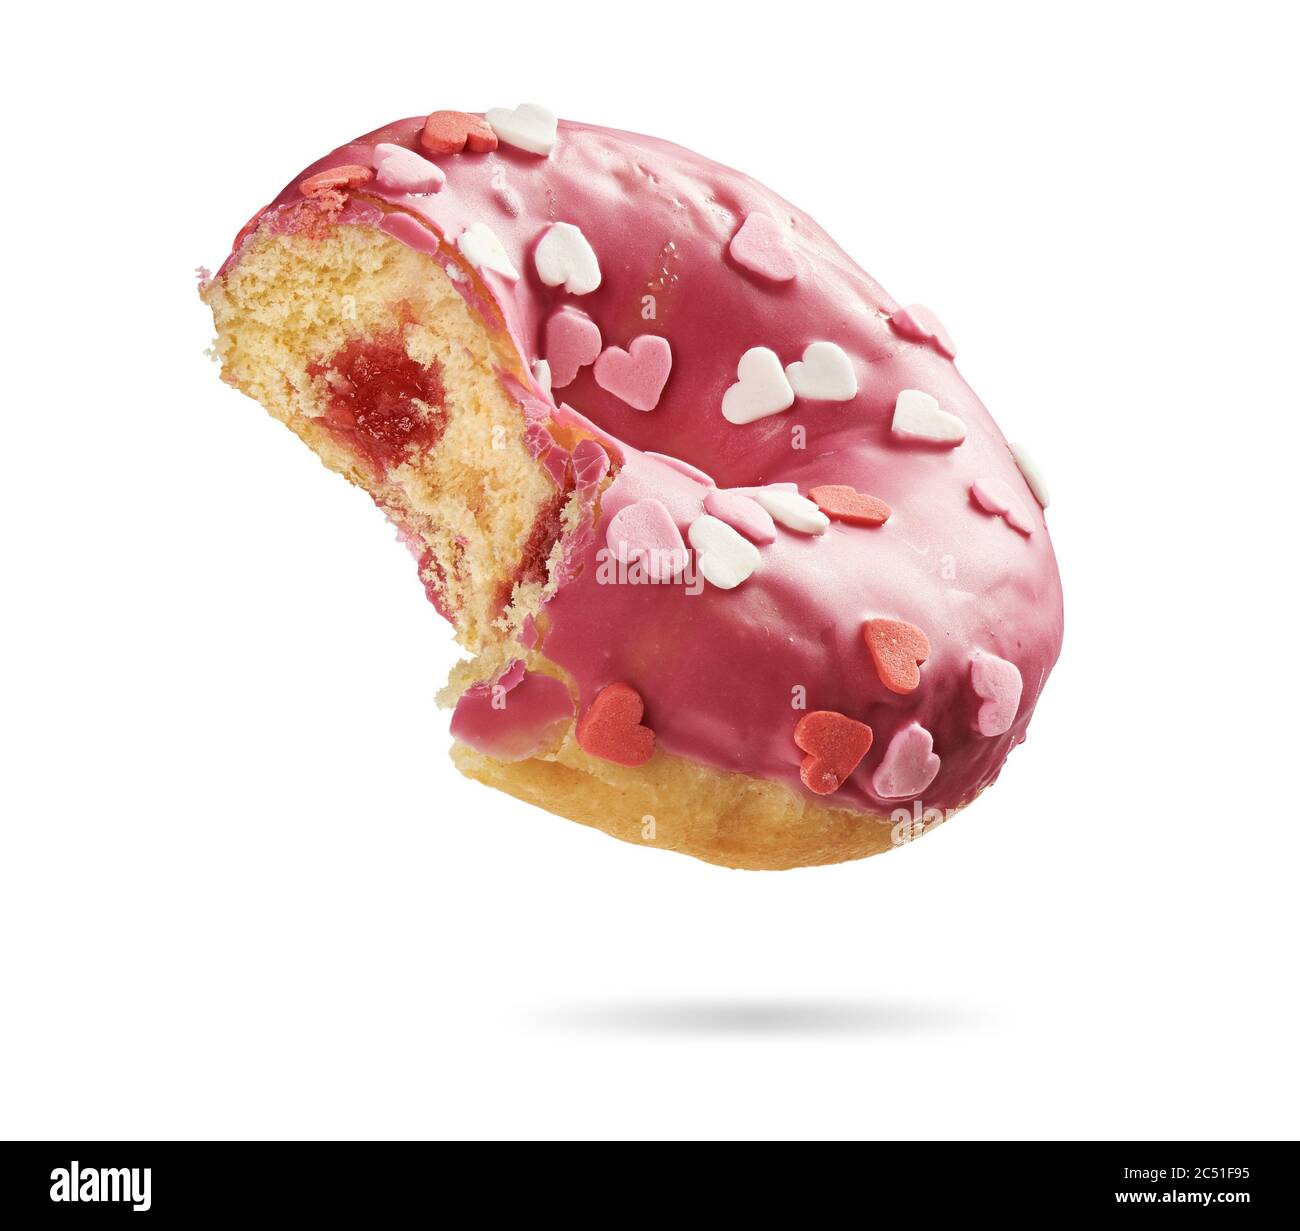 https://c8.alamy.com/comp/2C51F95/bitten-strawberry-donut-with-colorful-sprinkles-in-heart-shape-isolated-on-white-background-top-view-2C51F95.jpg